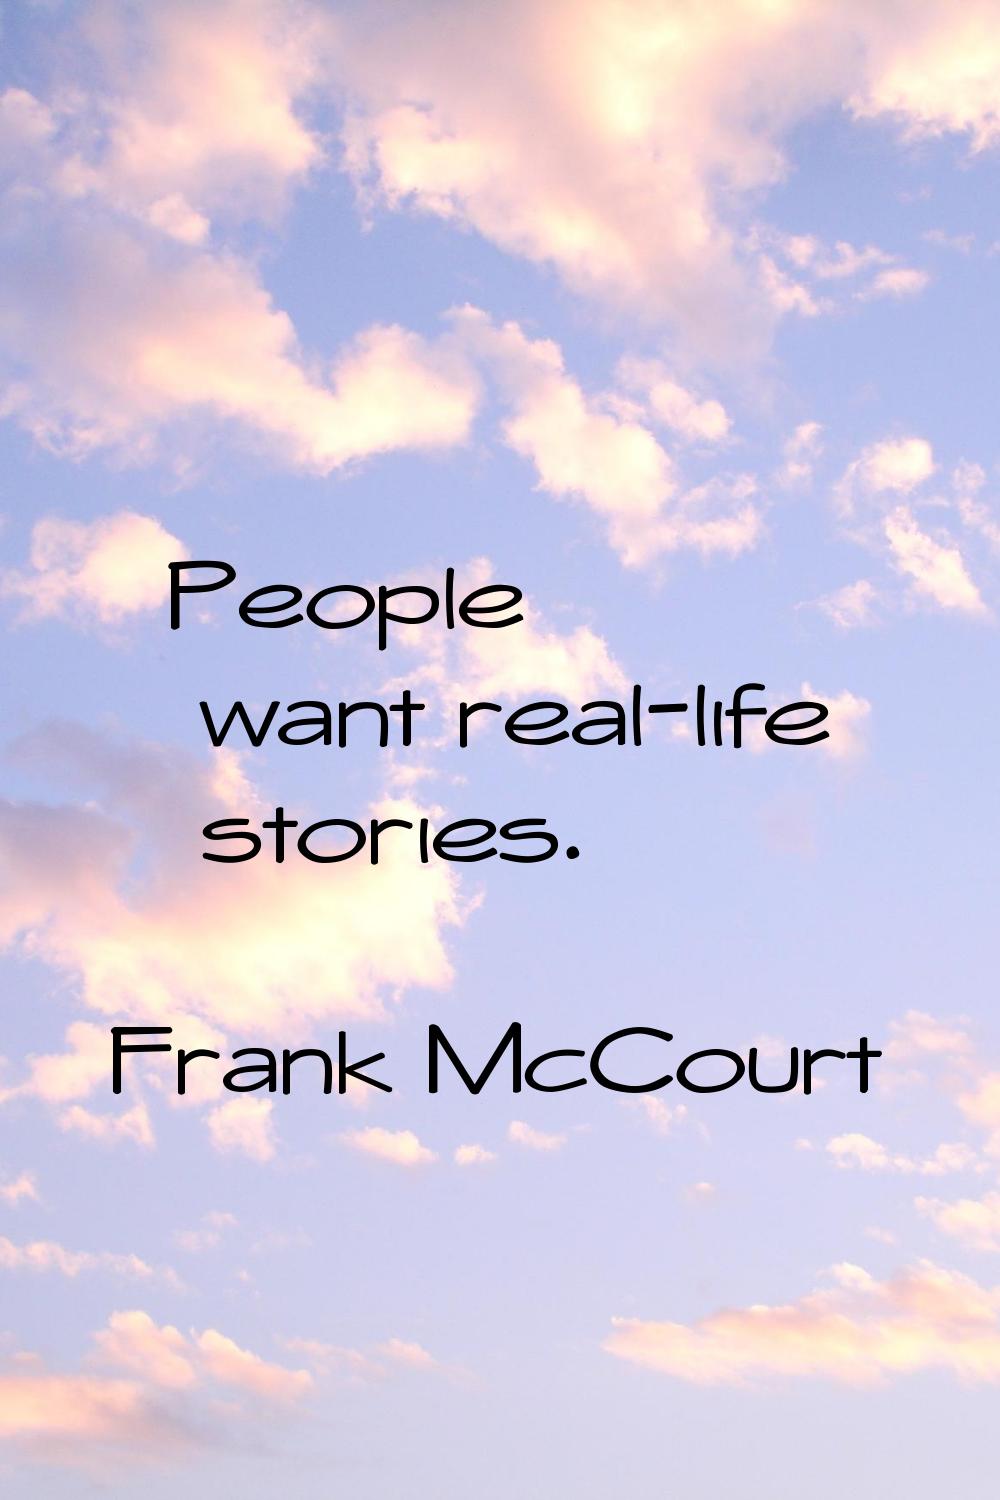 People want real-life stories.